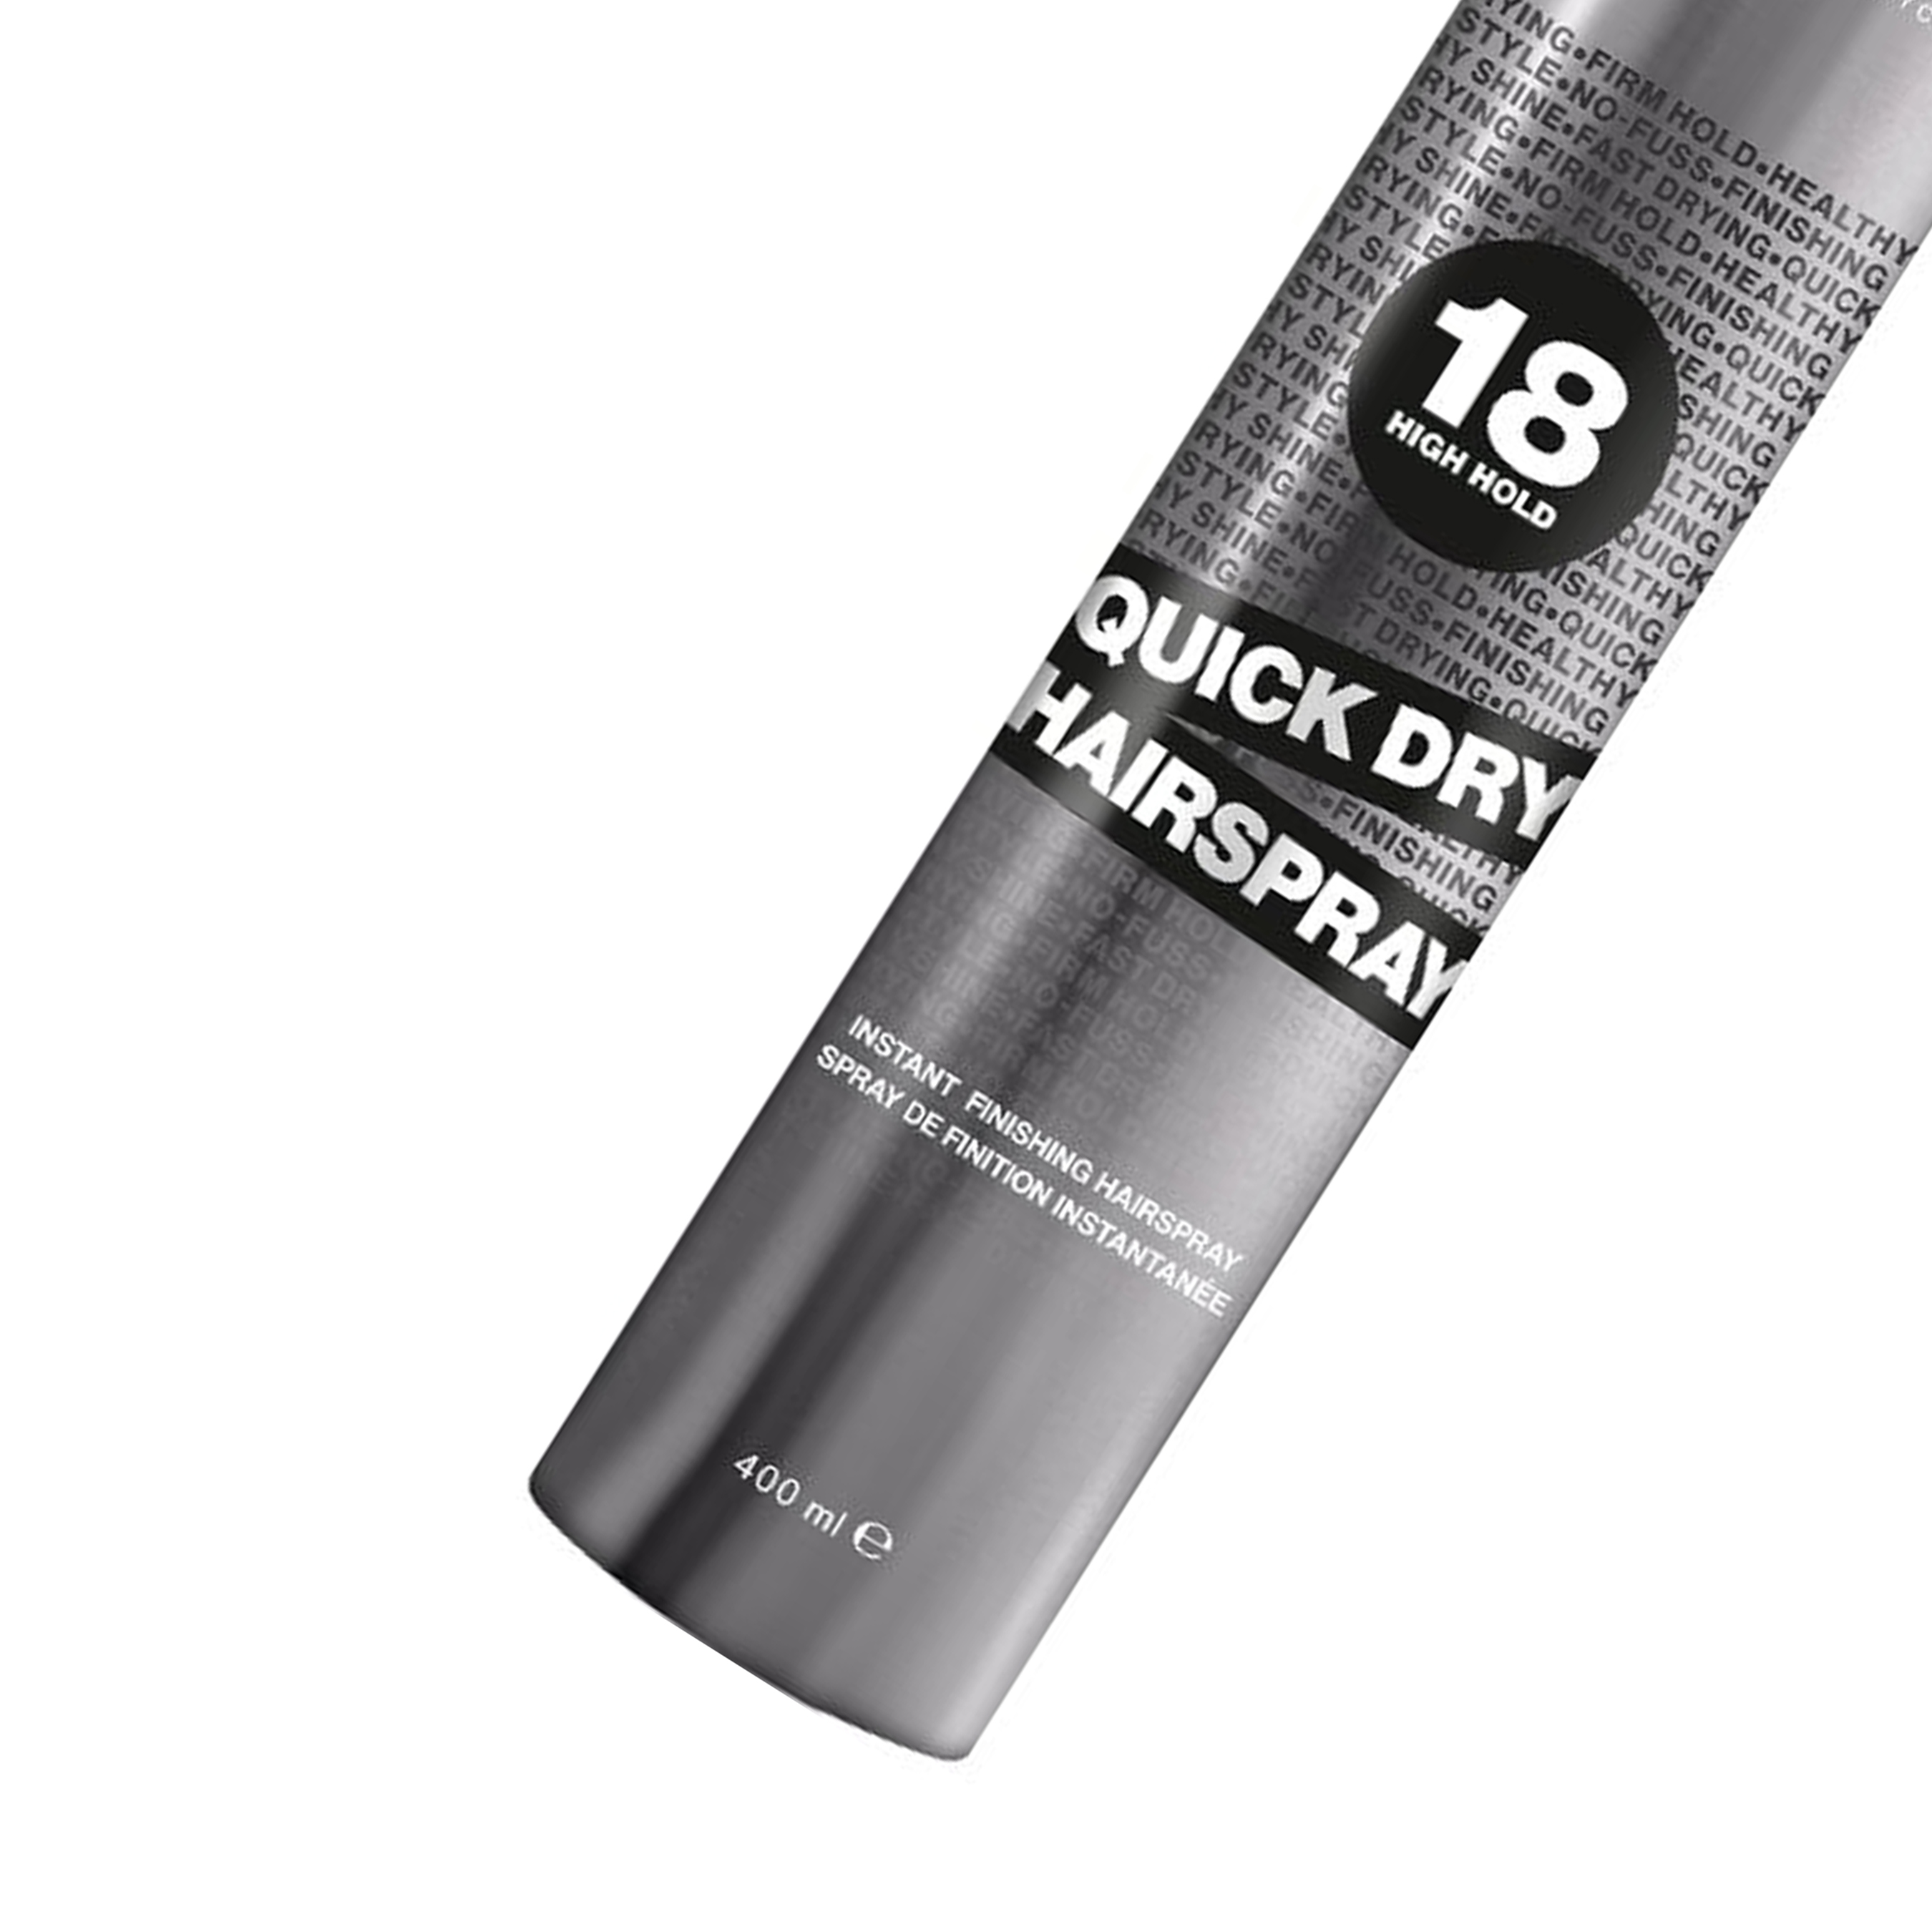 REDKEN QUICK DRY 18 INSTANT FINISHING HAIRSPRAY 9.8 OZ - image 3 of 5